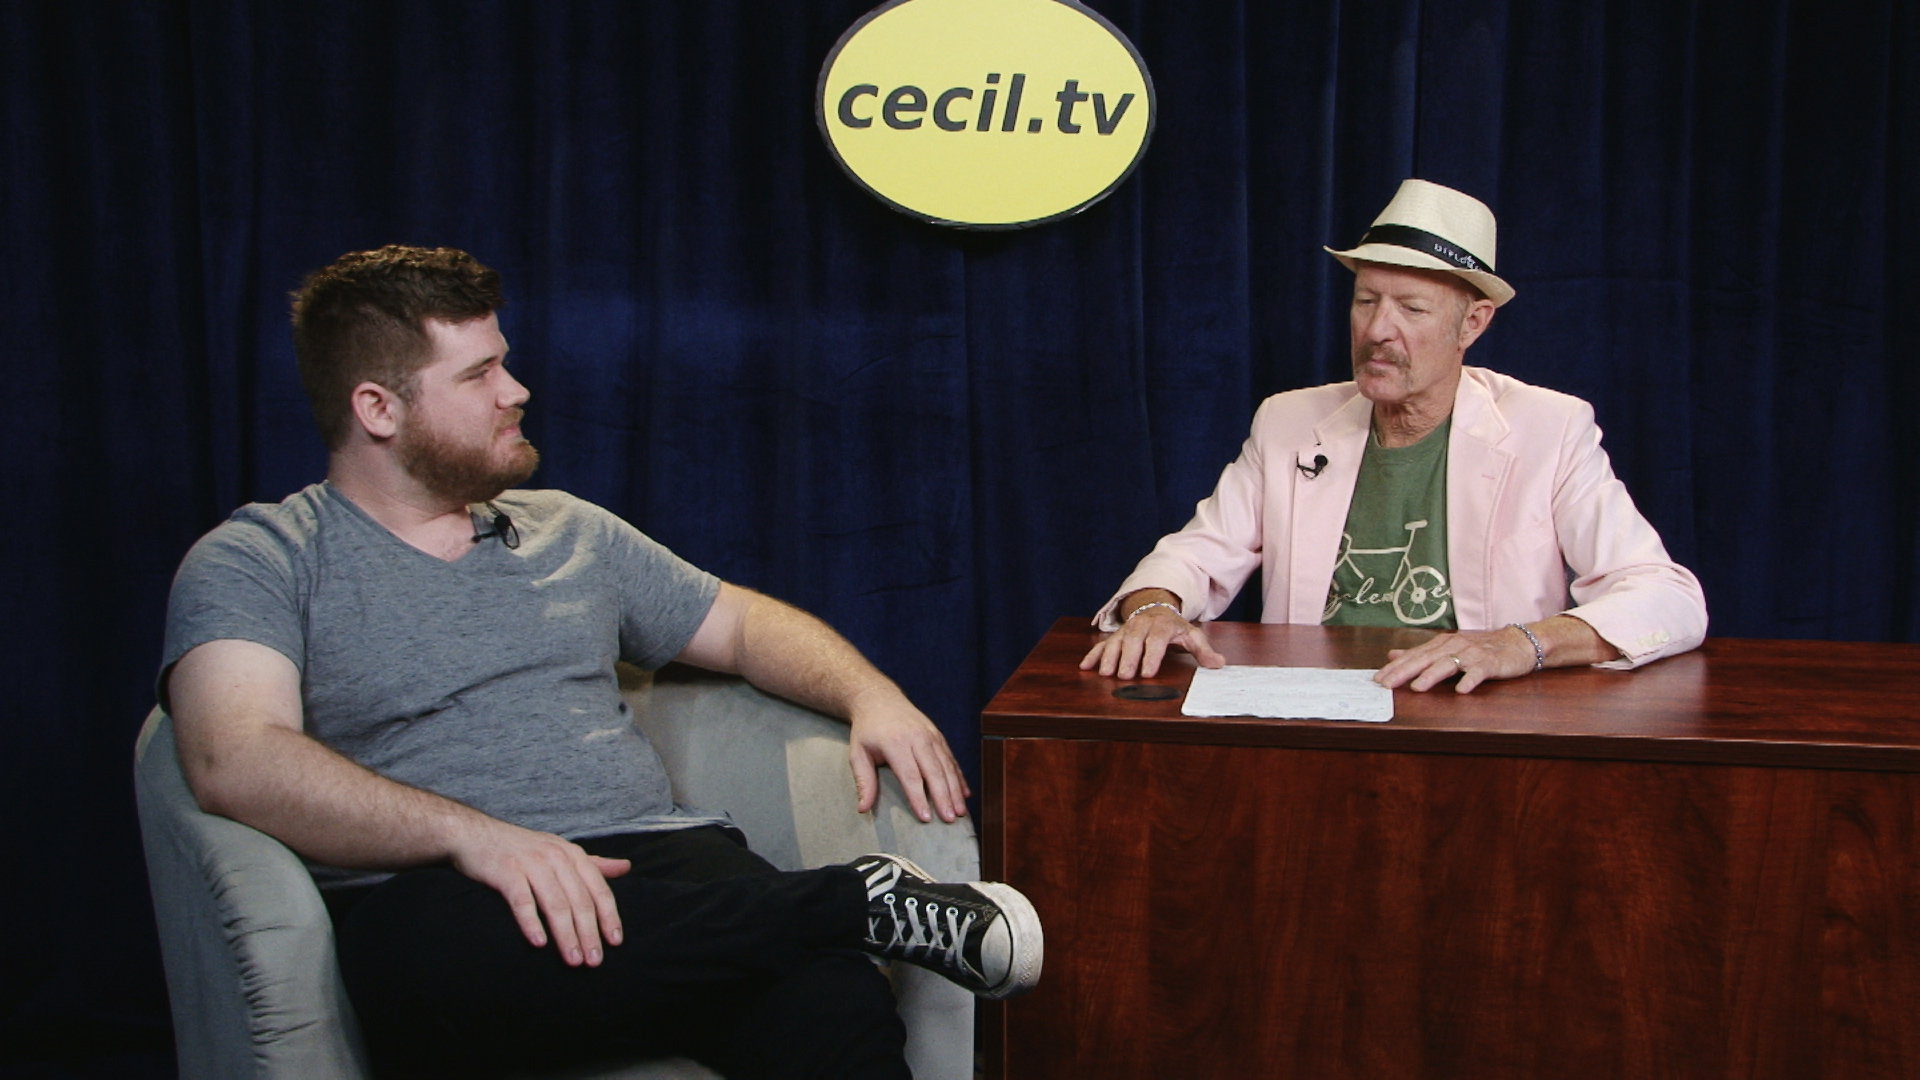 Cecil TV | Leif McCurry on 30@6 | July 9, 2019